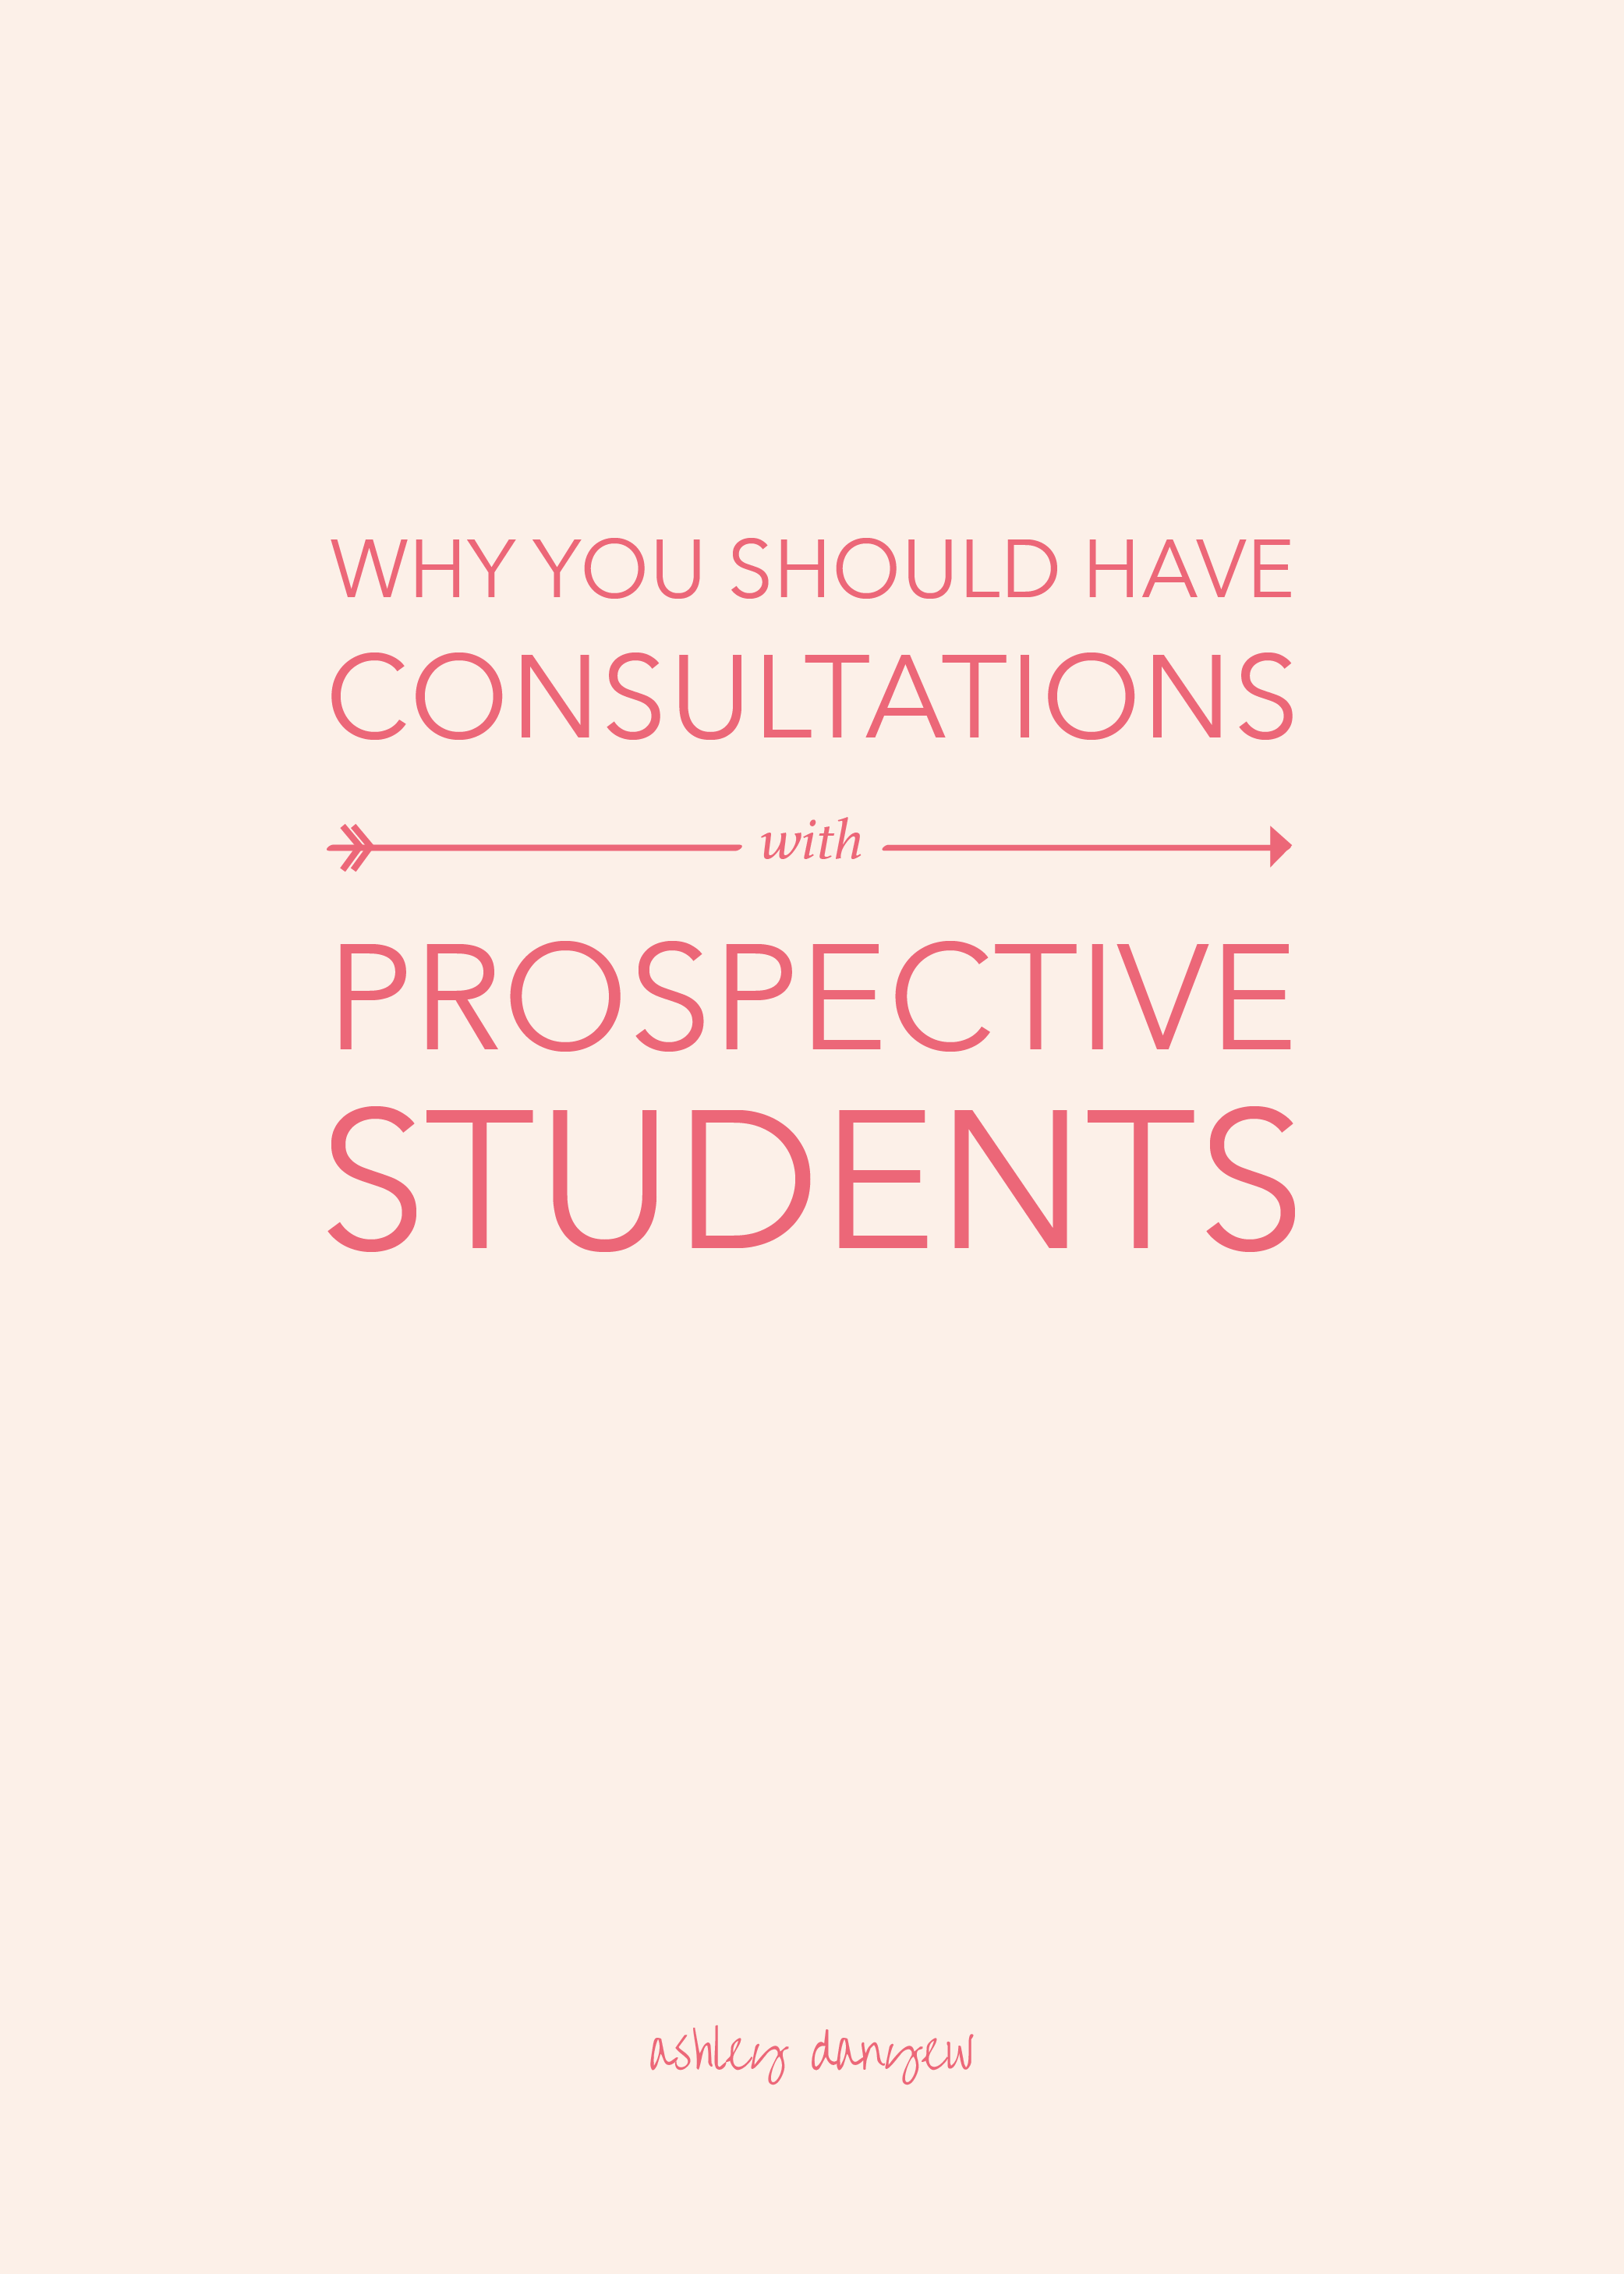 Why You Should Have Consultations With Prospective Students-01.png